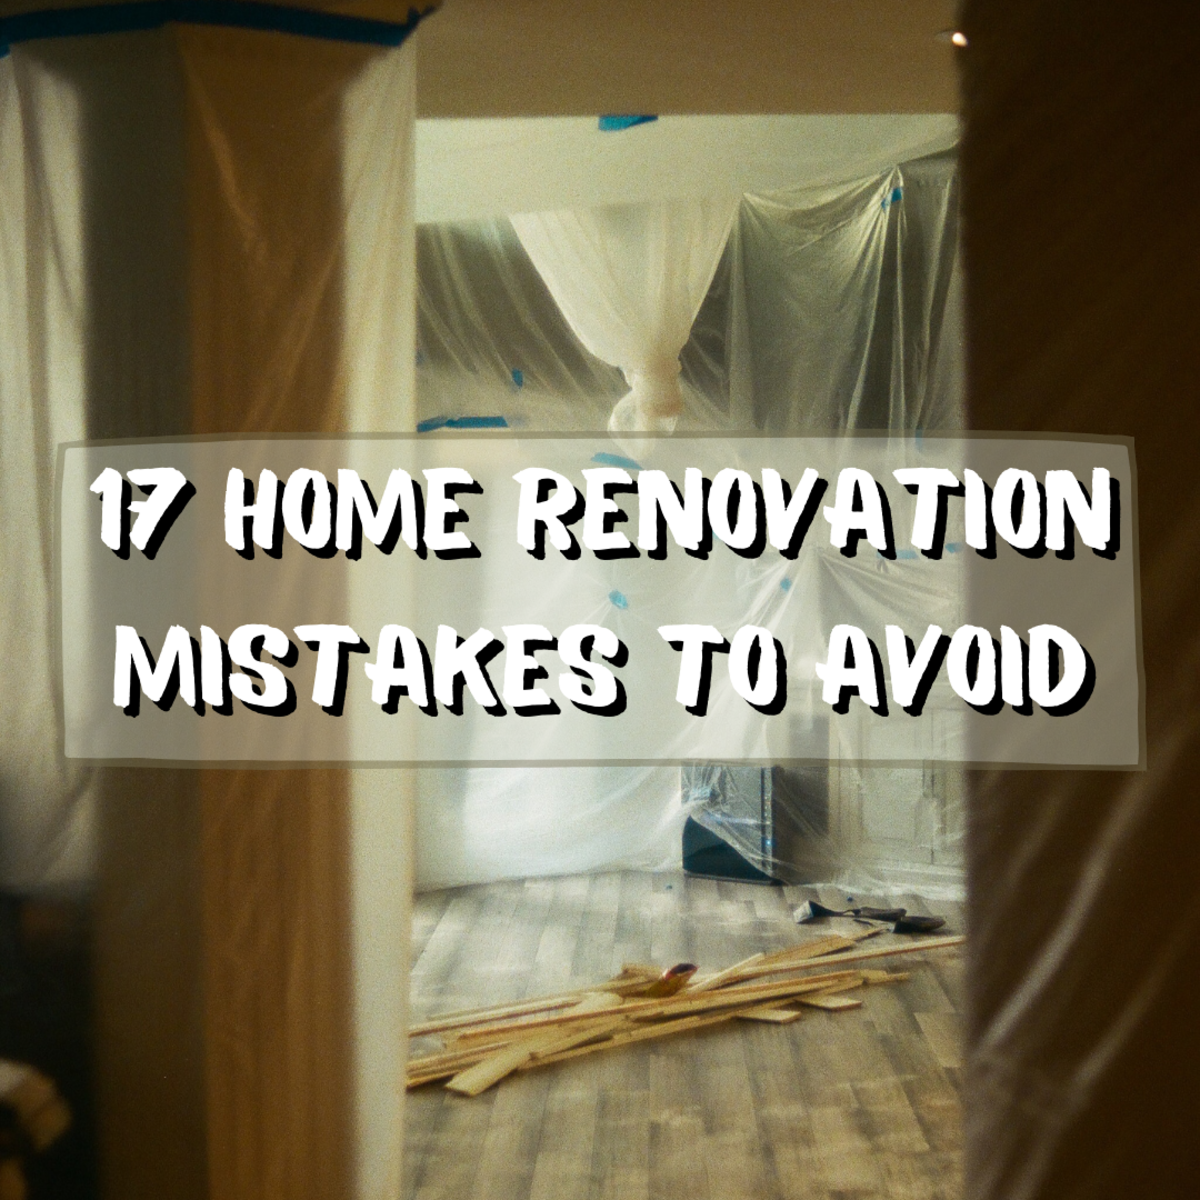 17 Home Renovation Mistakes Every Home Owner Should Avoid